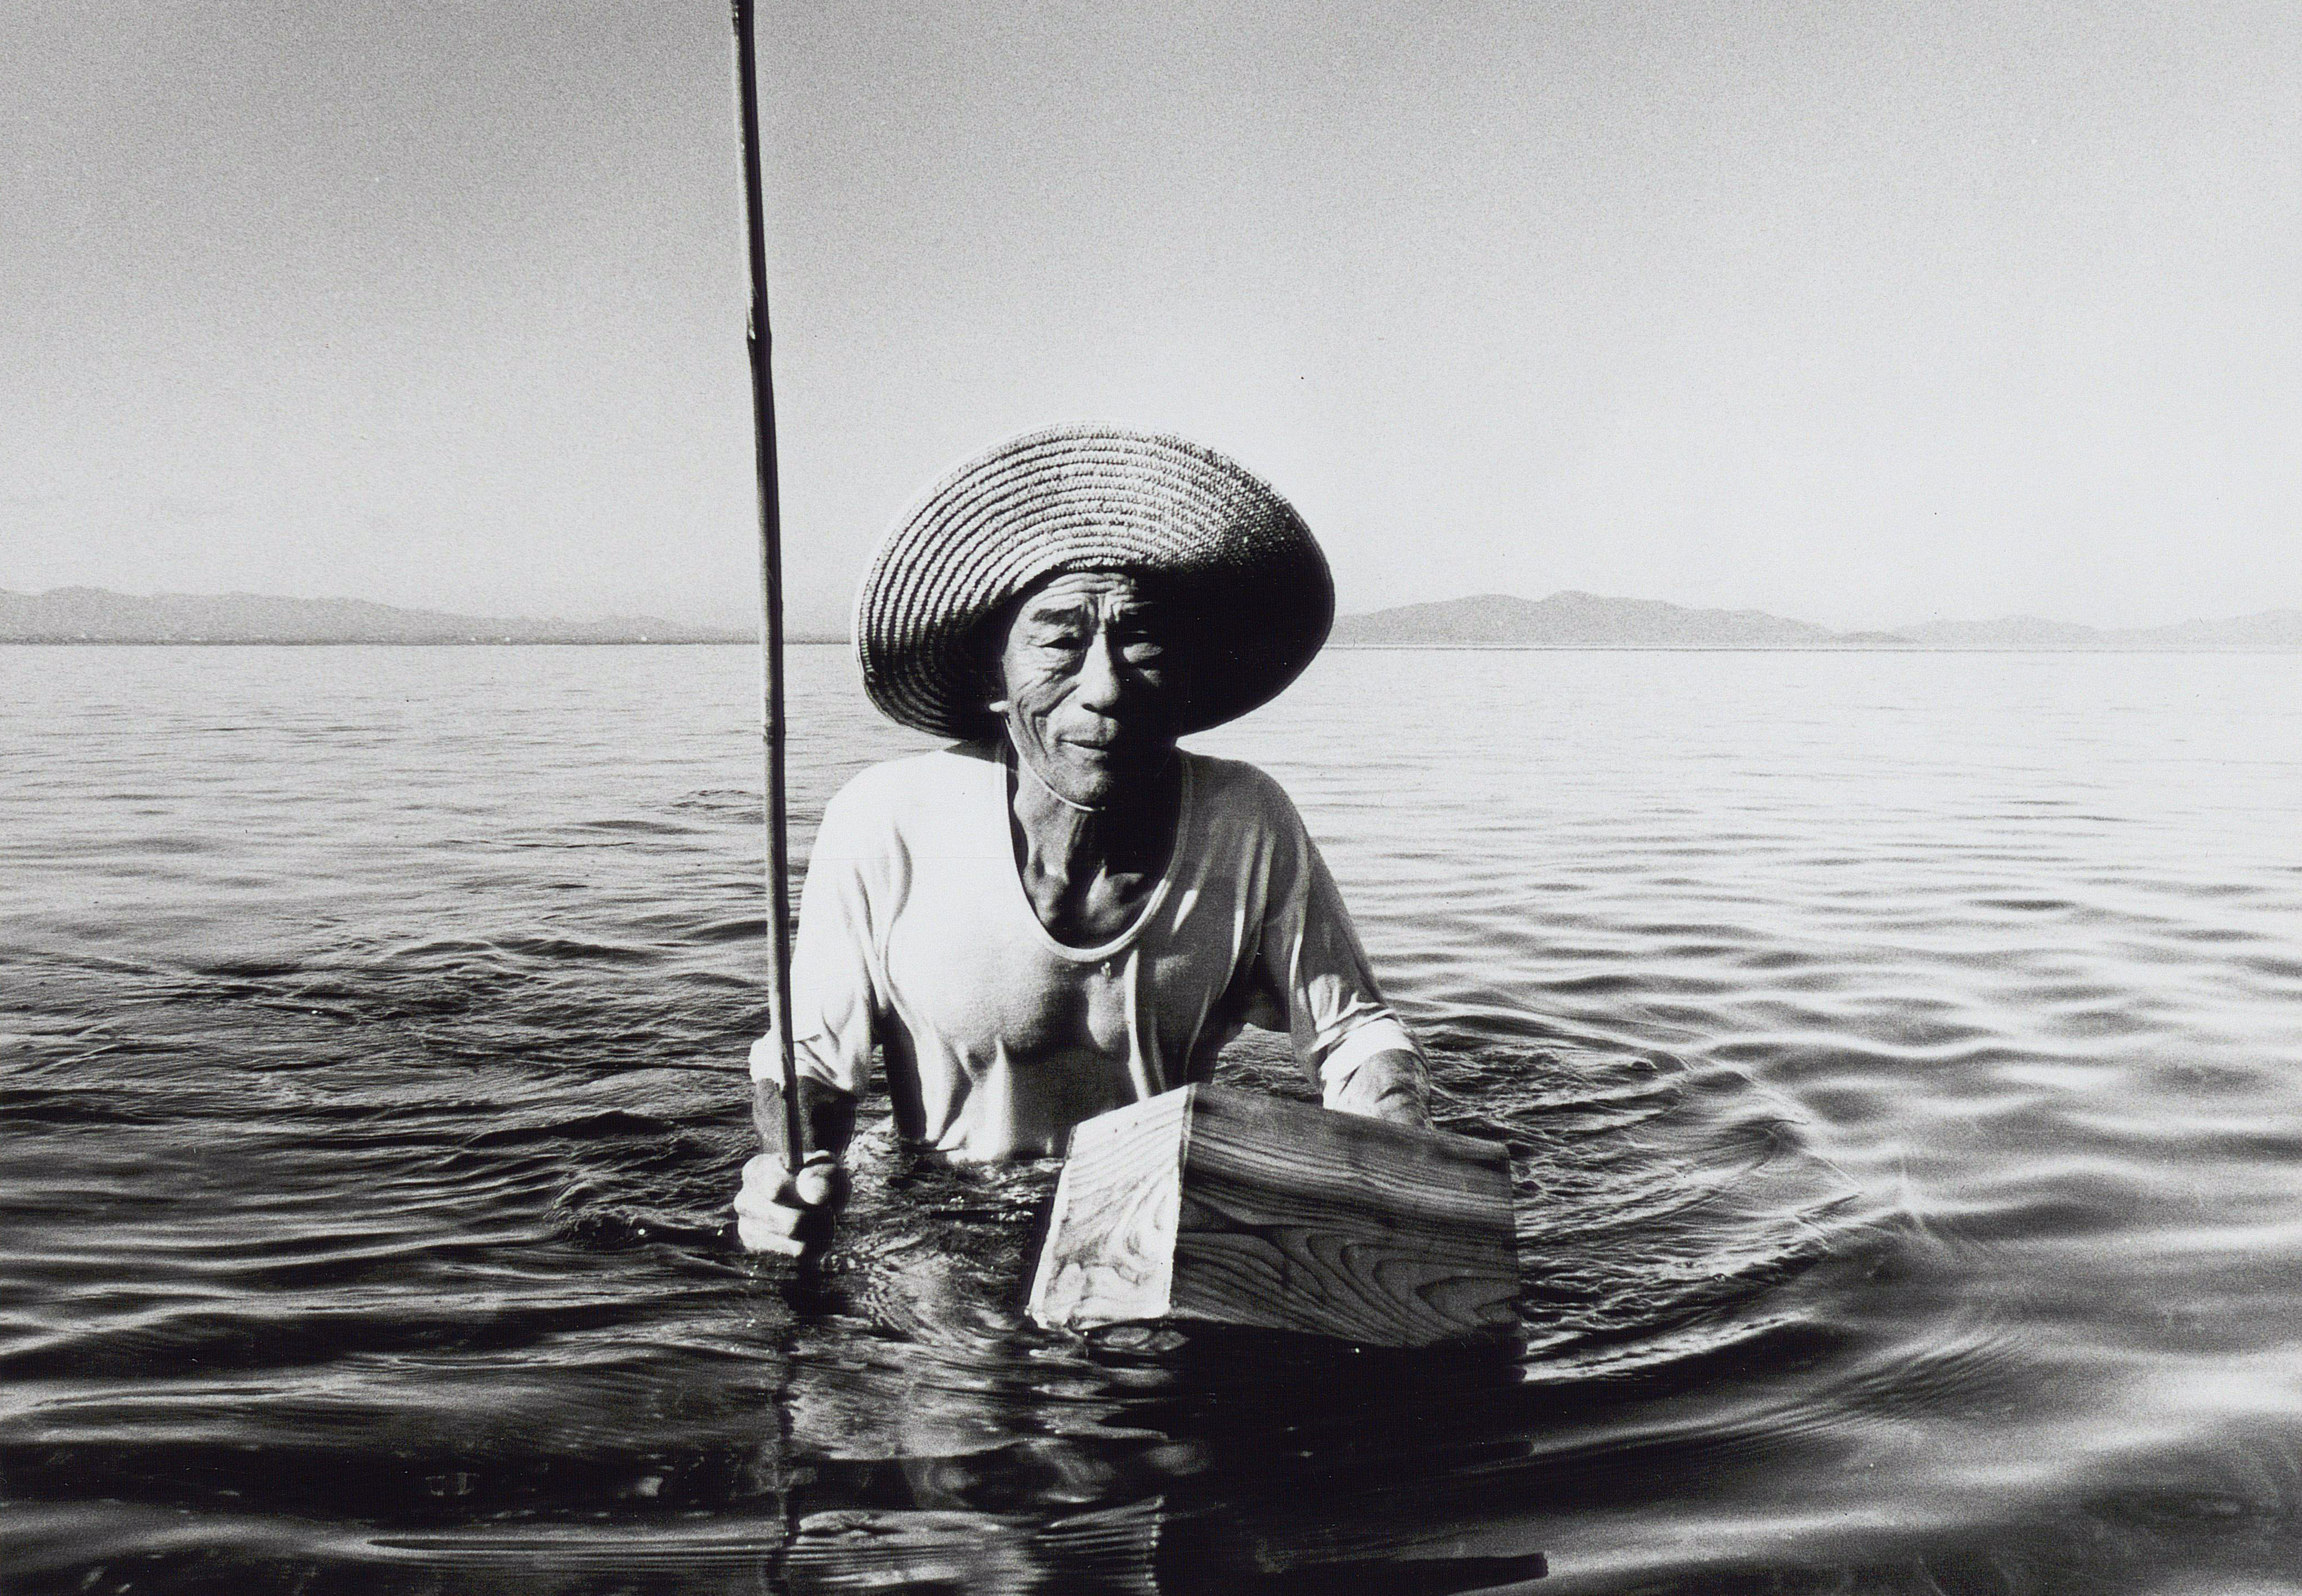 A Japanese fisherman man wearing a hat to shade himself from the sun wades through water while fishing. Photo courtesy of Siglo, Inc. 